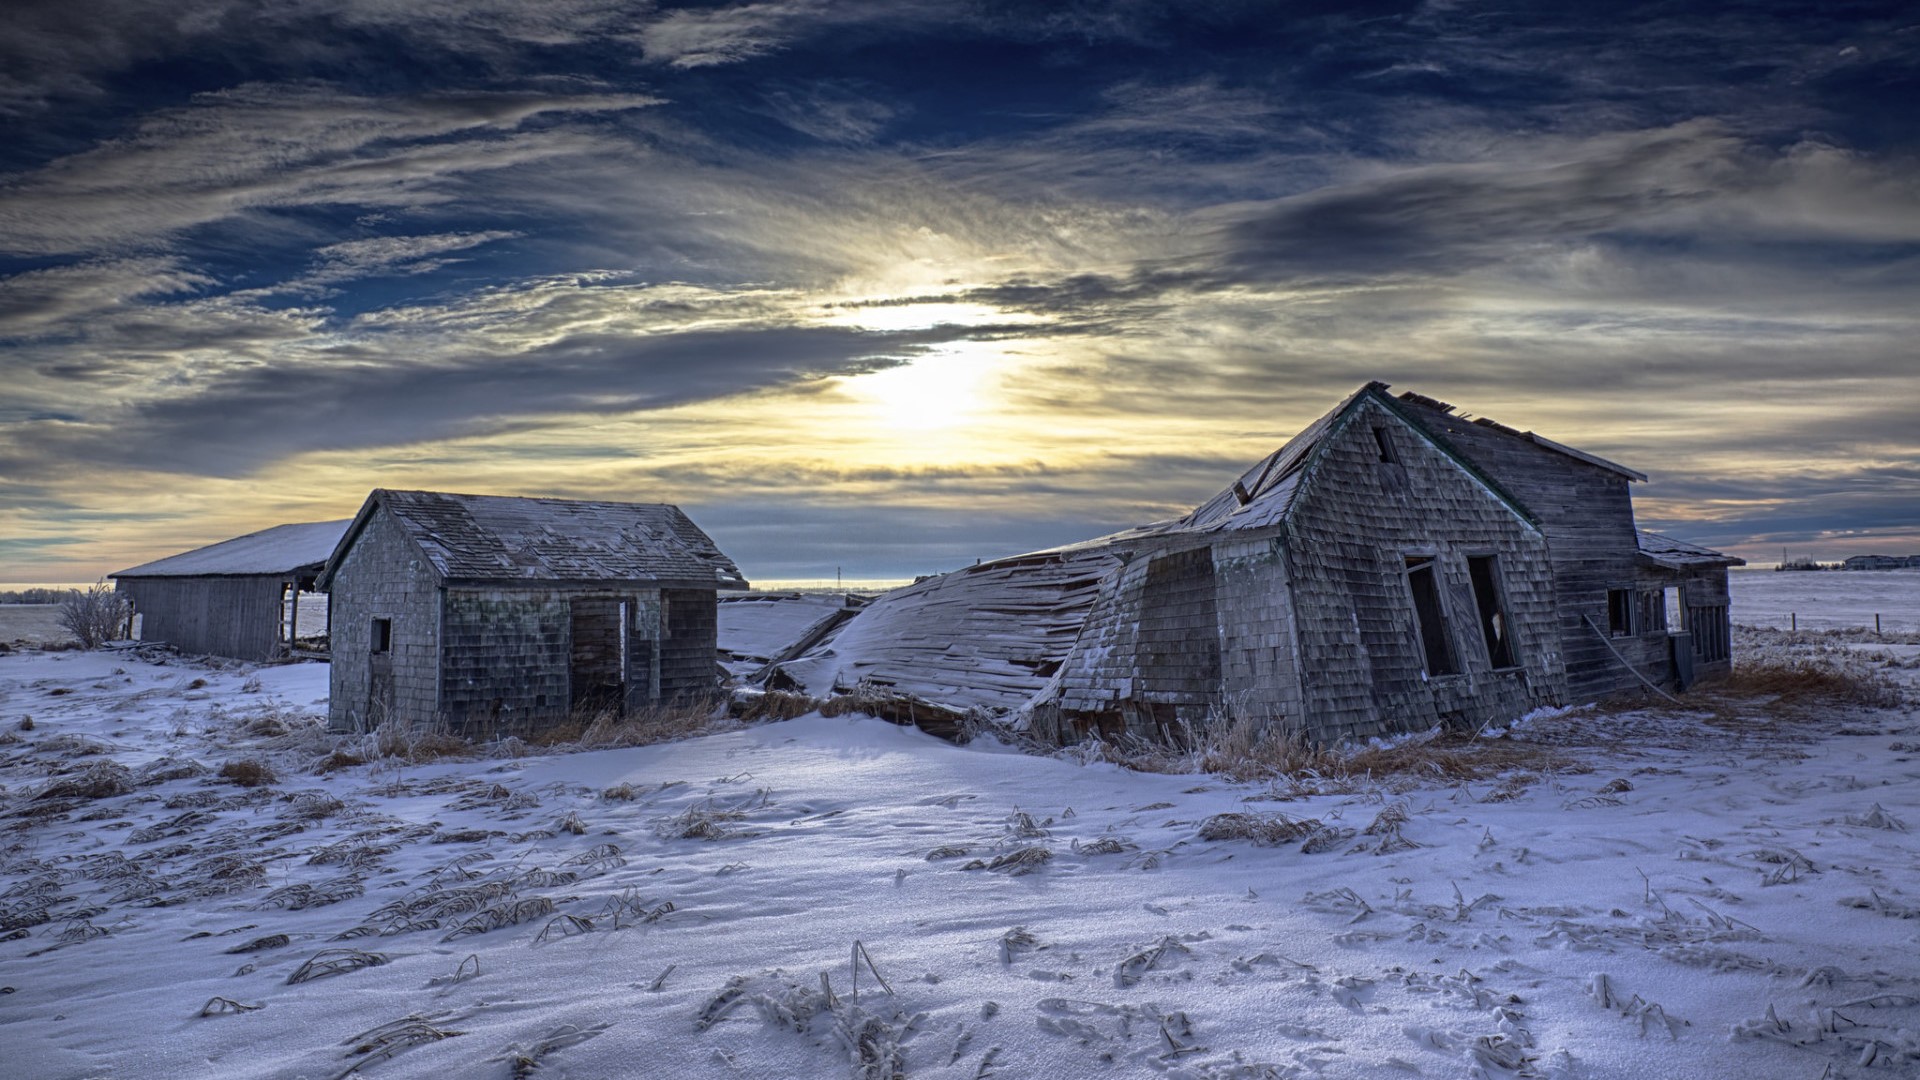 General 1920x1080 landscape winter ruins sky clouds abandoned house snow depressing